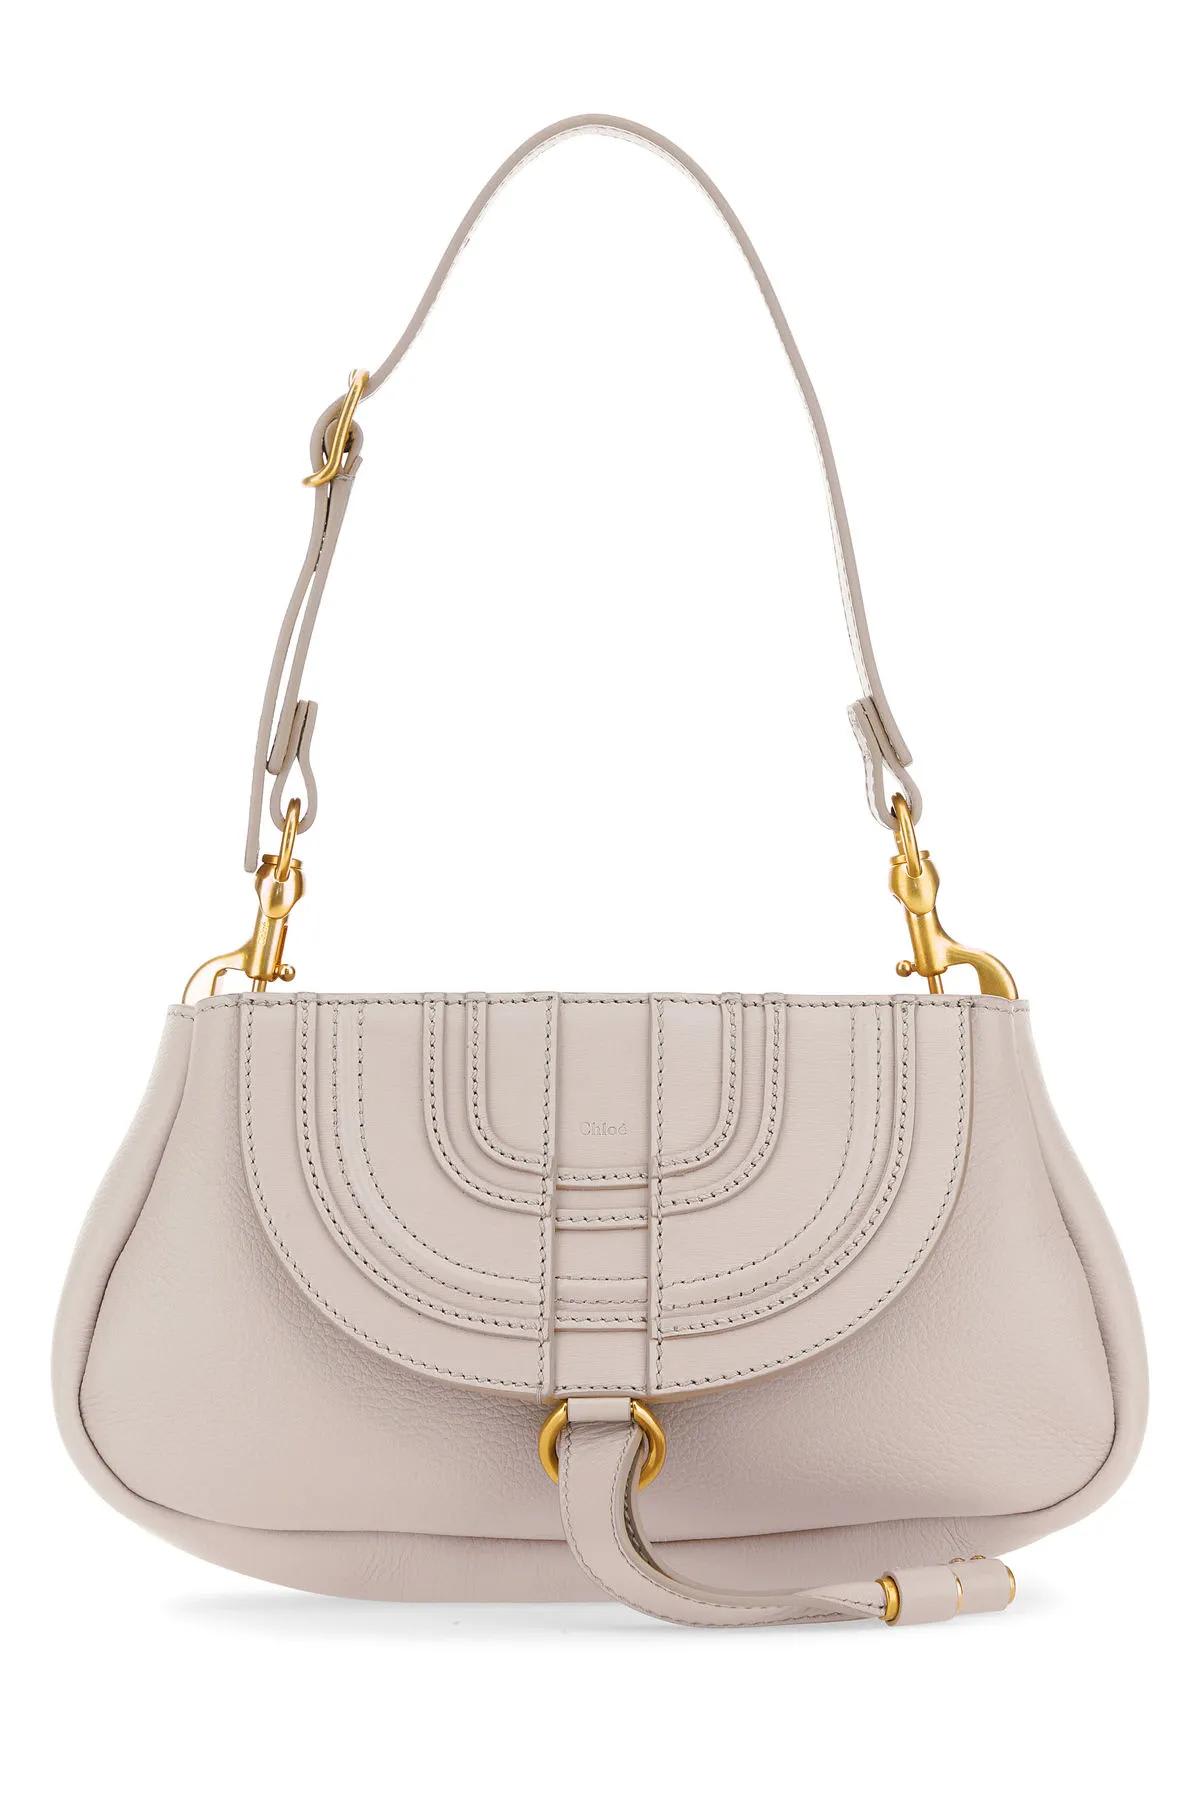 Chloé Light Pink Leather Small Marcie Clutch